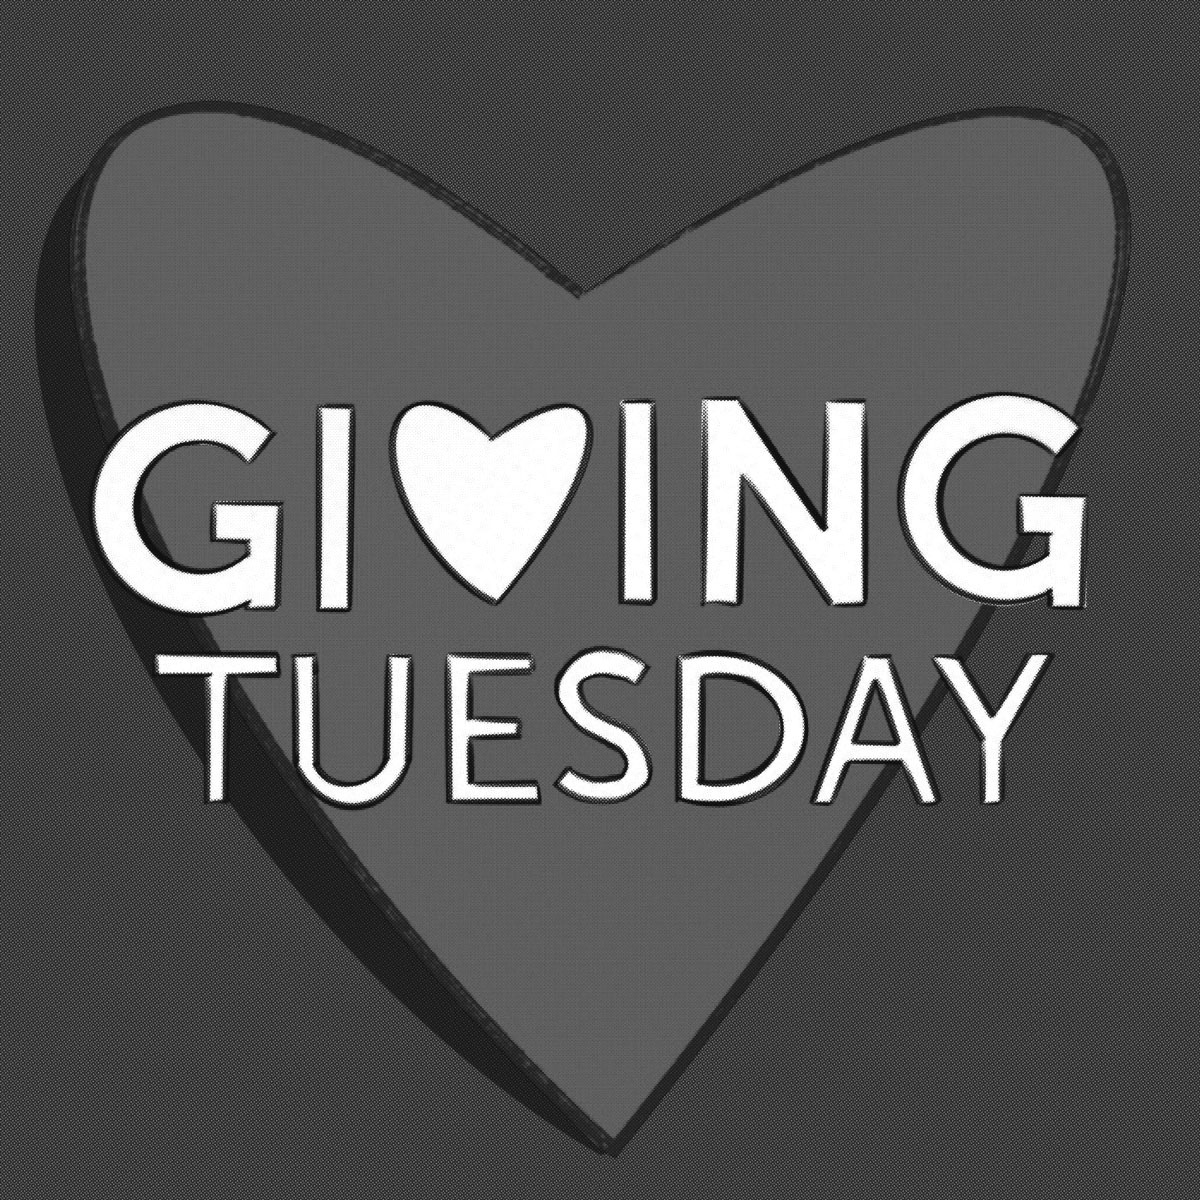 6 ways to give back this Giving Tuesday